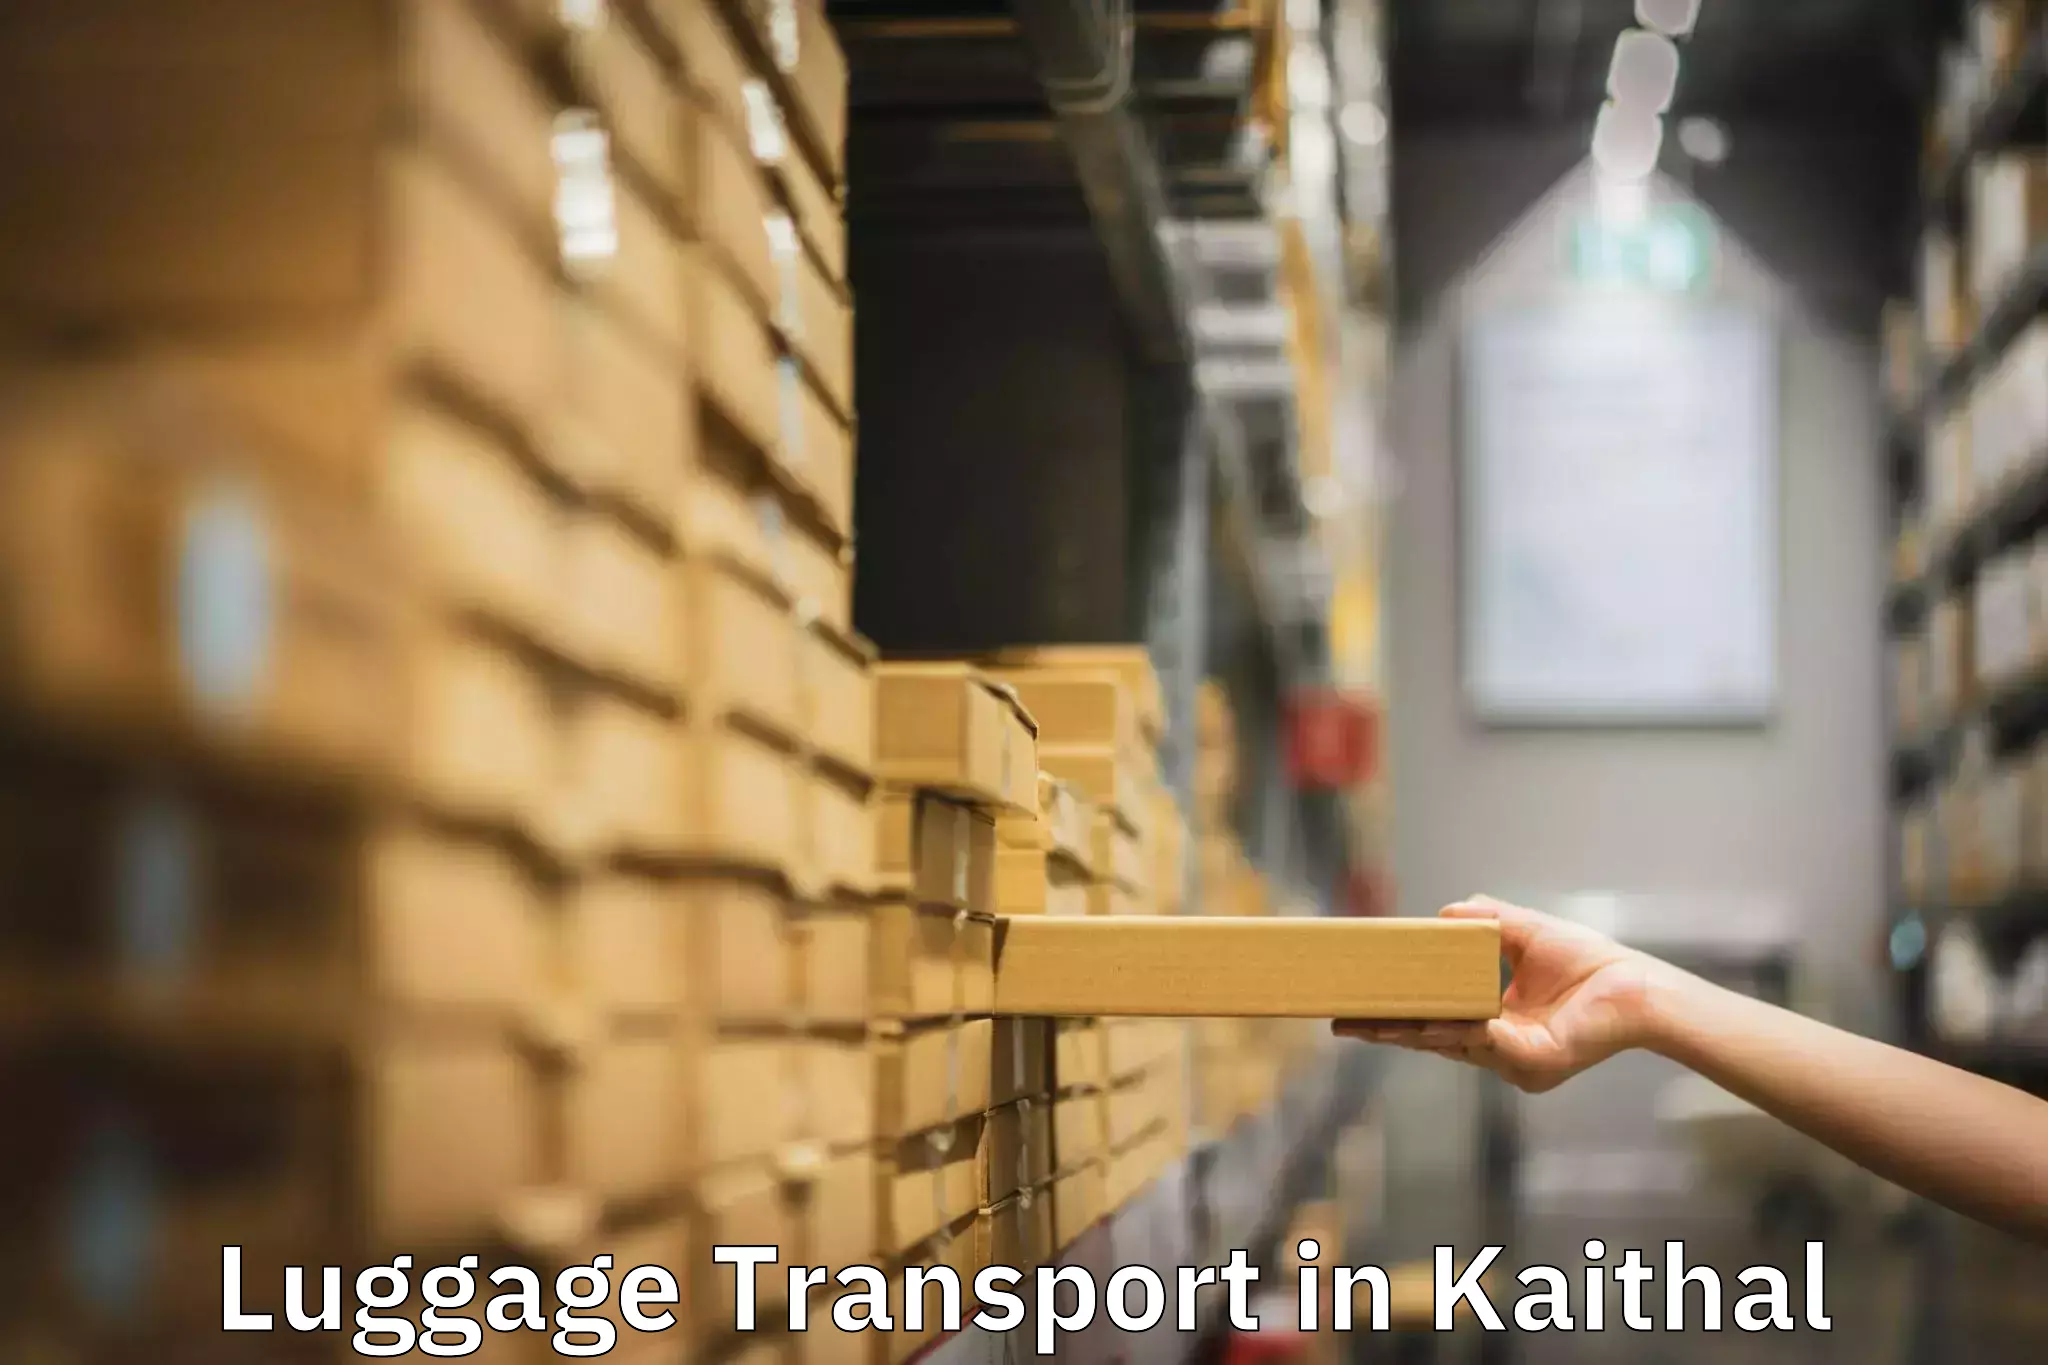 Baggage transport innovation in Kaithal